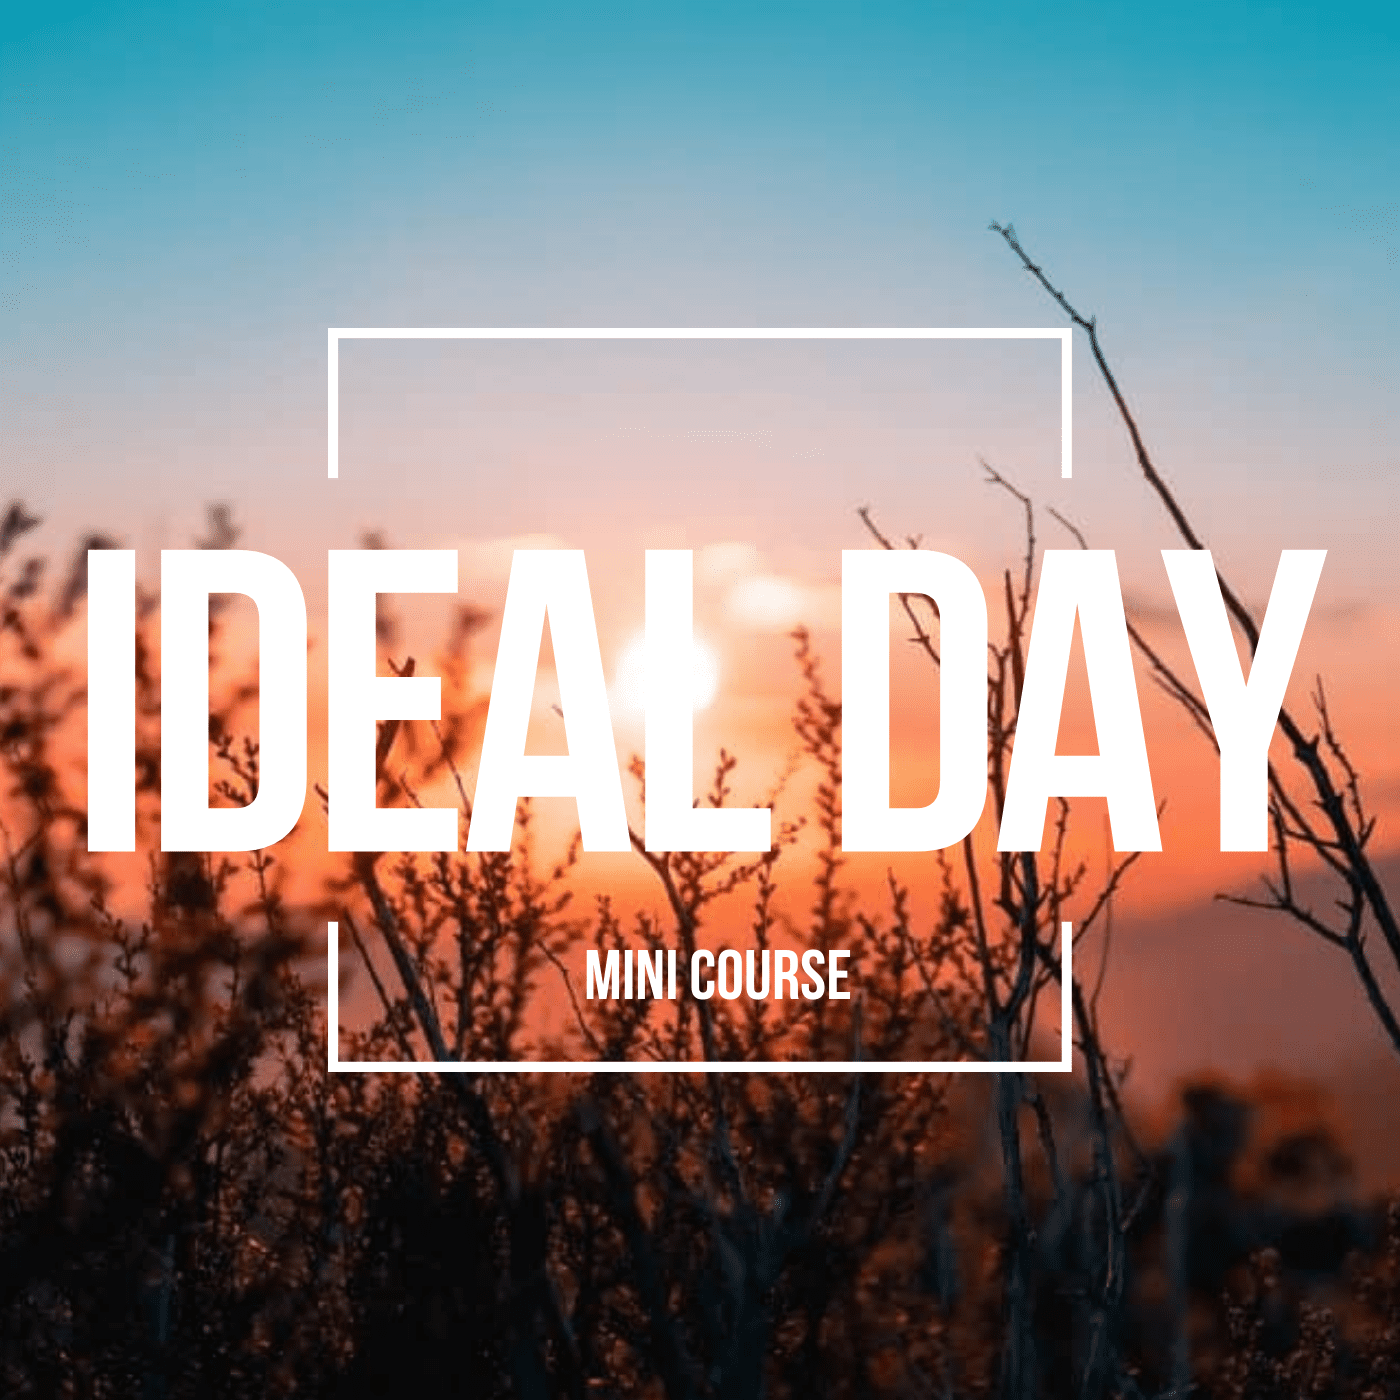 Ideal Day course